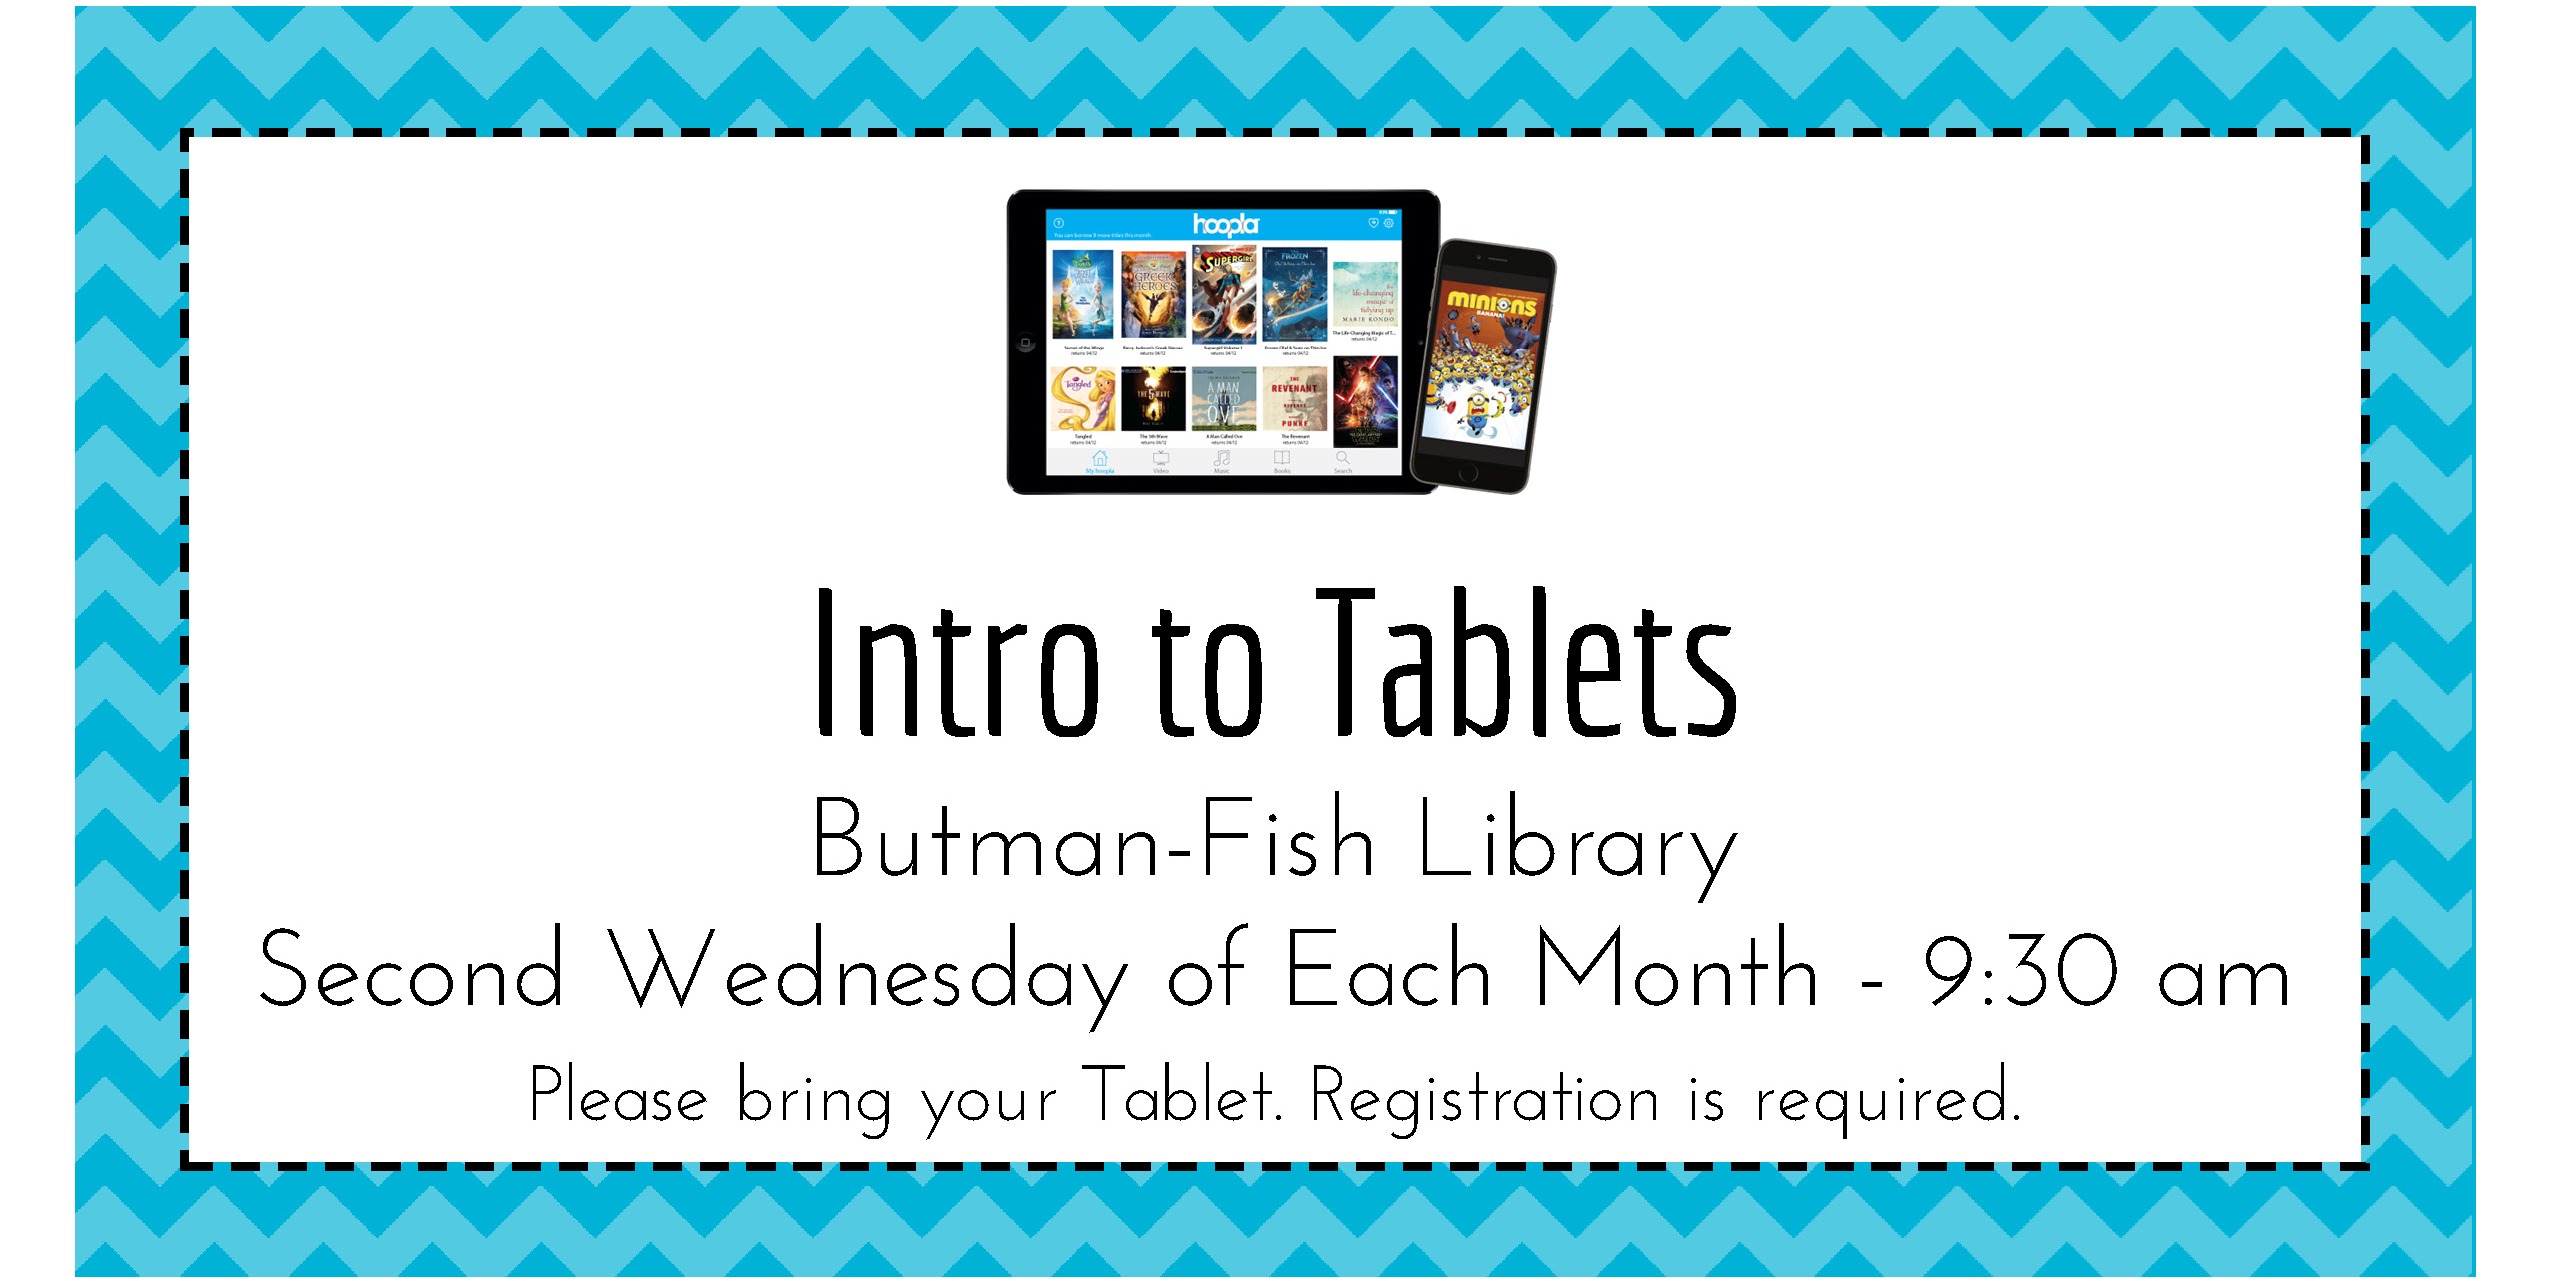 INTRO TO TABLETS IS THE SECOND WEDNESDAY AT 9:30